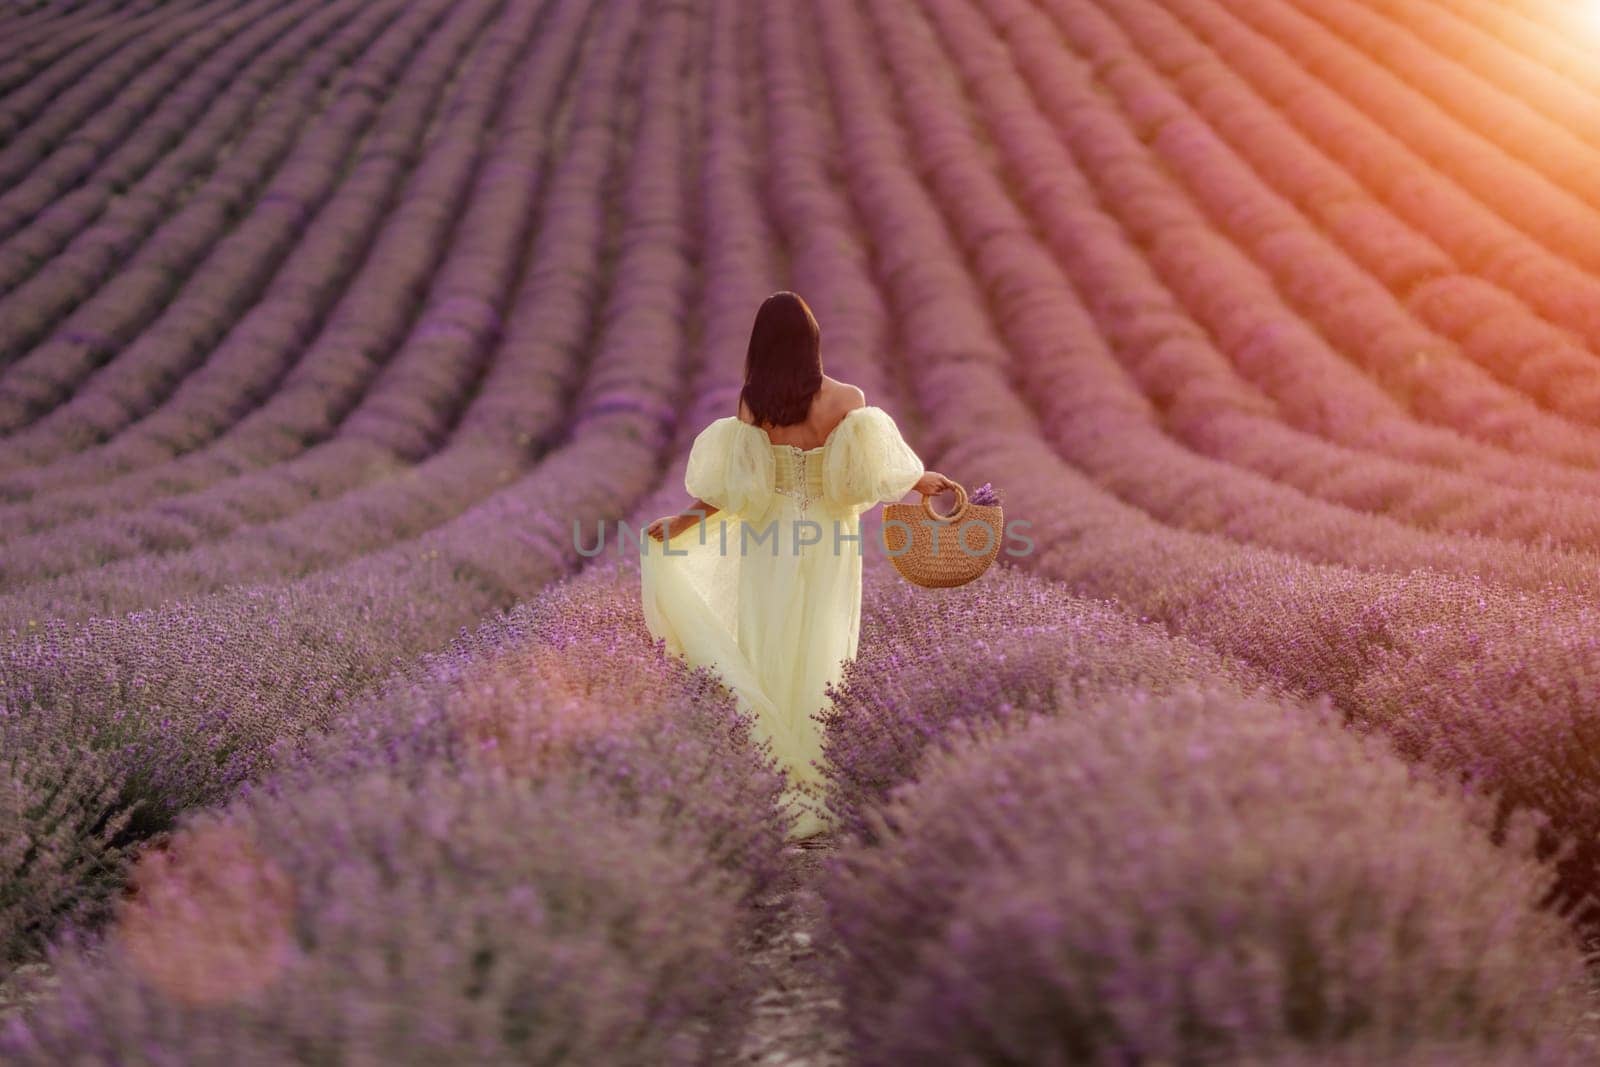 A woman in a yellow dress walks through a field of lavender. The scene is serene and peaceful, with the woman's presence adding a sense of calm to the landscape. by Matiunina